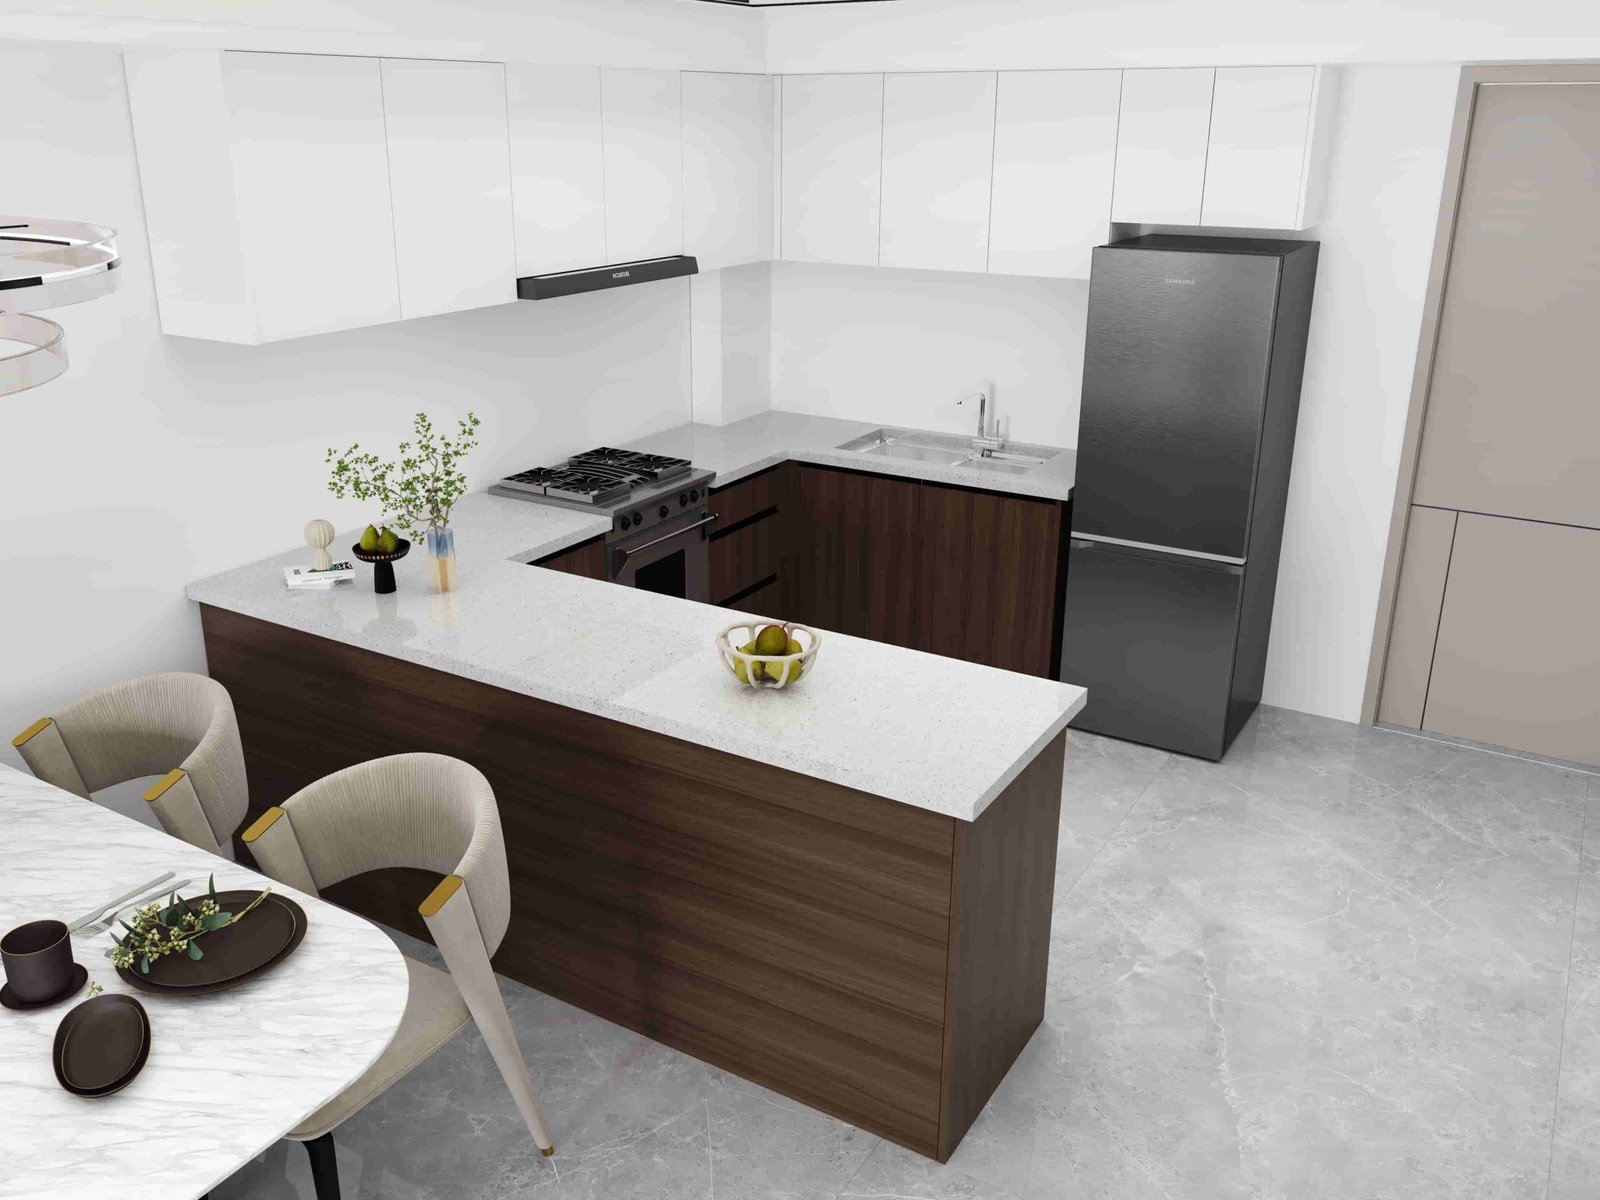 Traditional-Brown-and-White-U-Shaped-Small-Kitchen-Cabinets-1-scaled-1.jpg